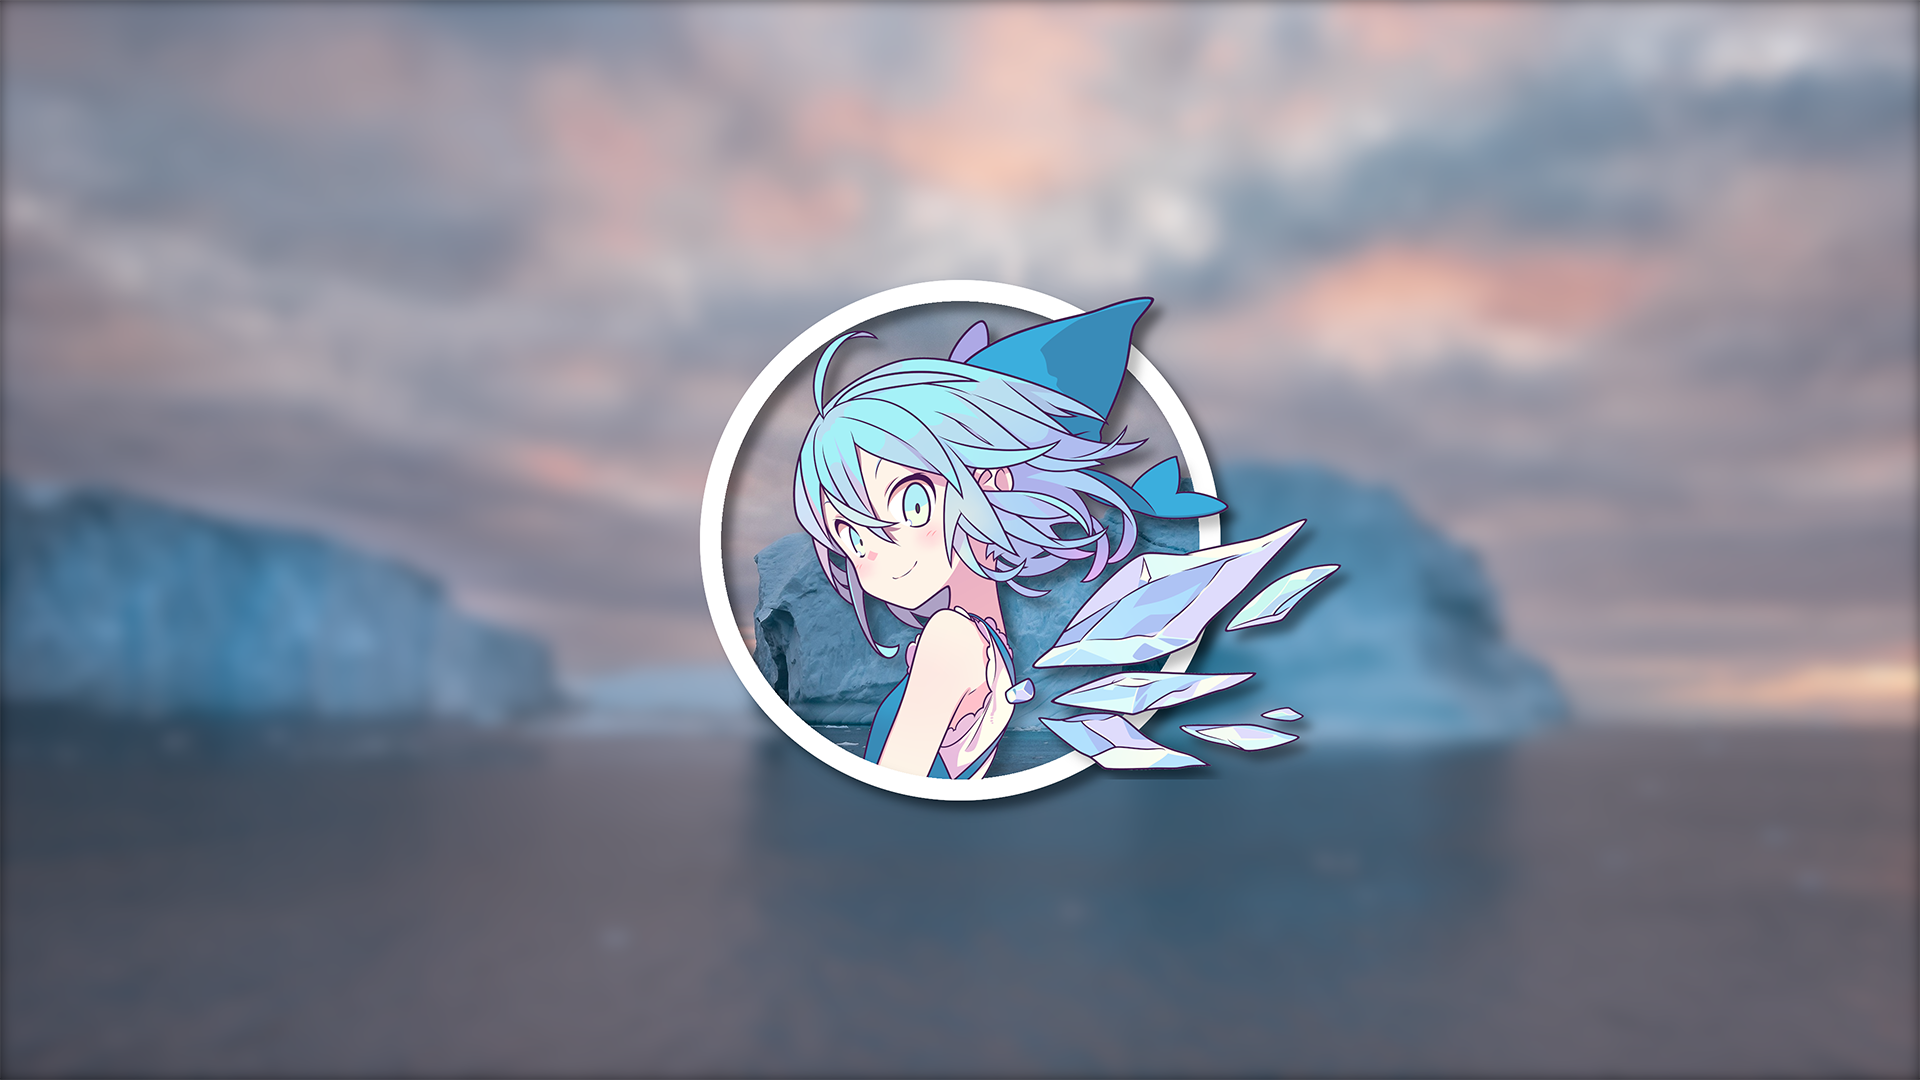 Anime 1920x1080 Cirno ice anime Touhou blue hair picture-in-picture wings